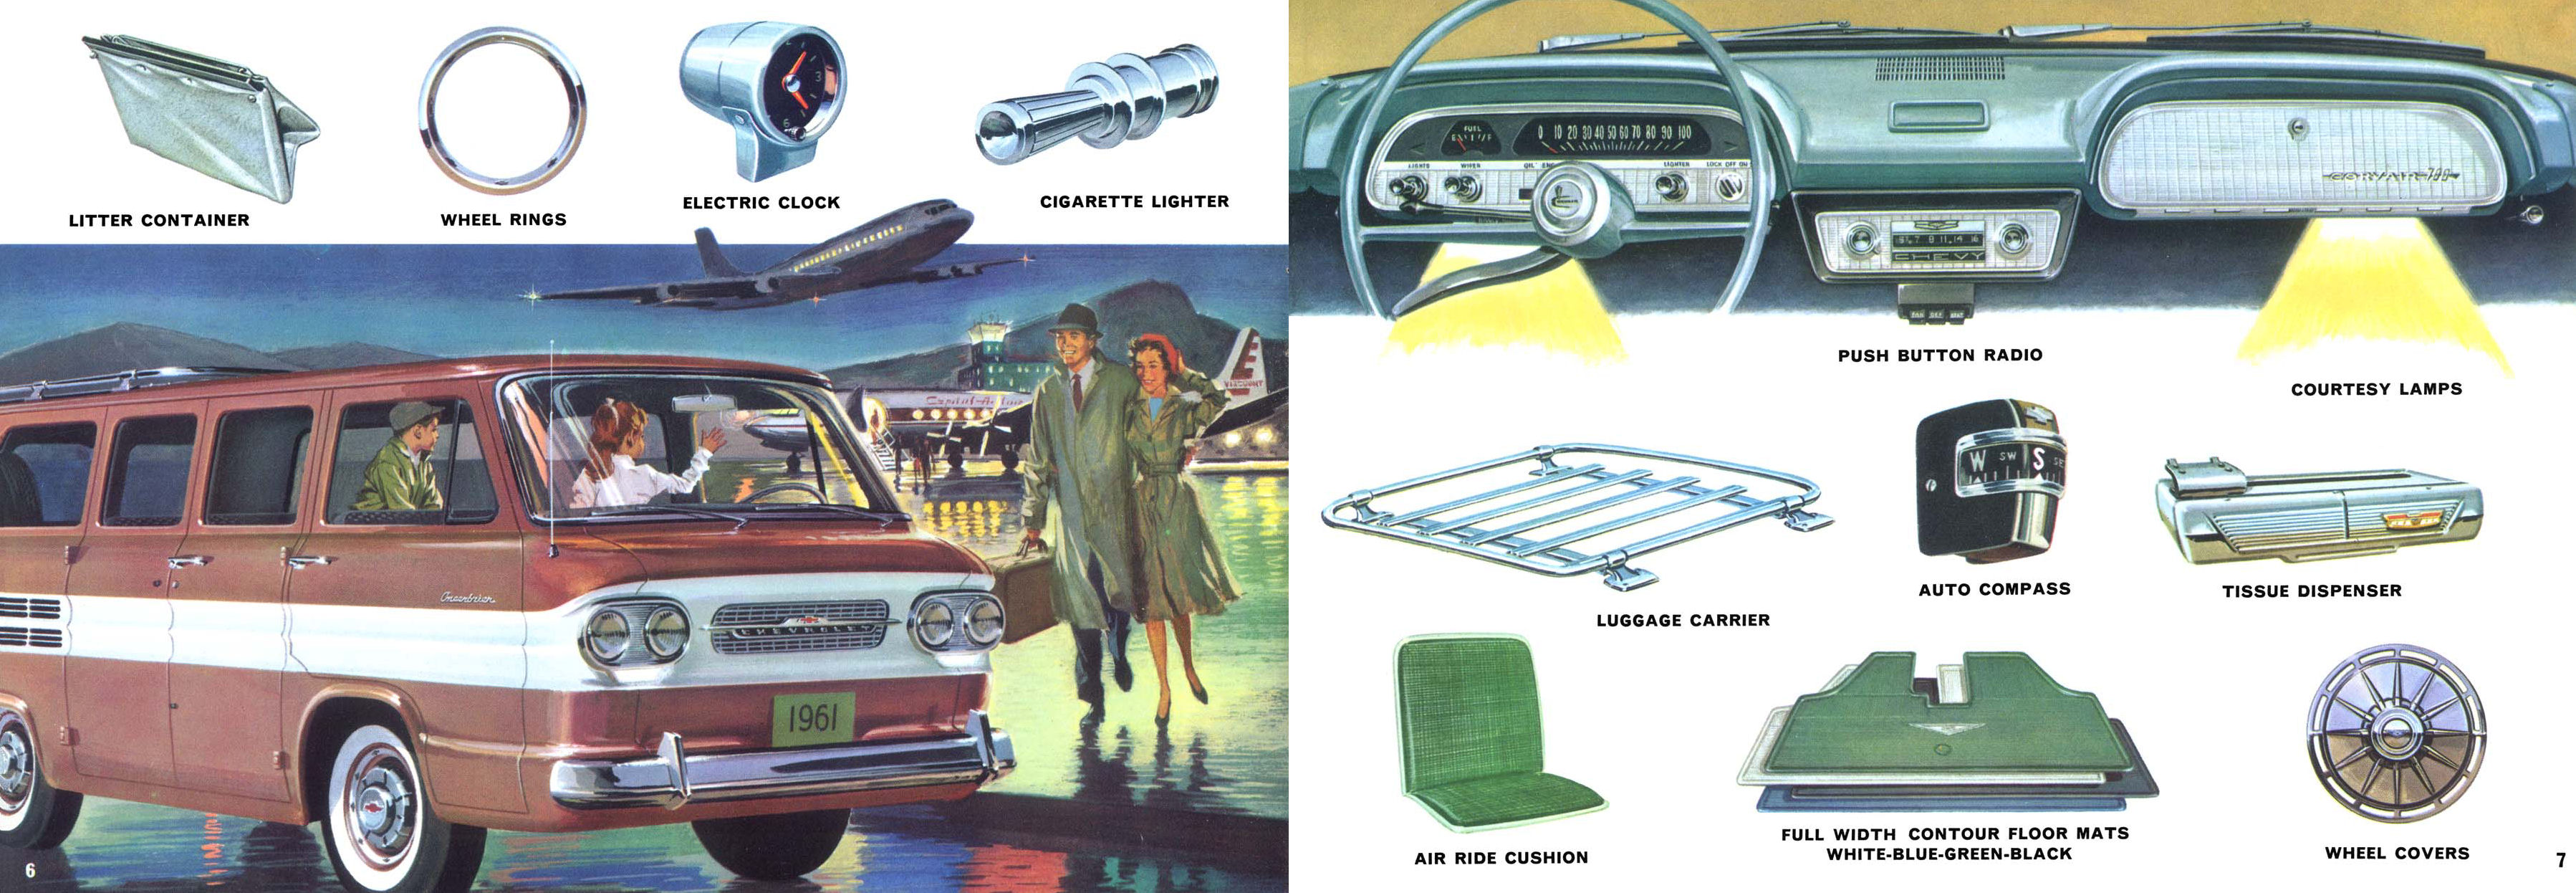 1961_Chevrolet_Corvair_Accessories-06-07